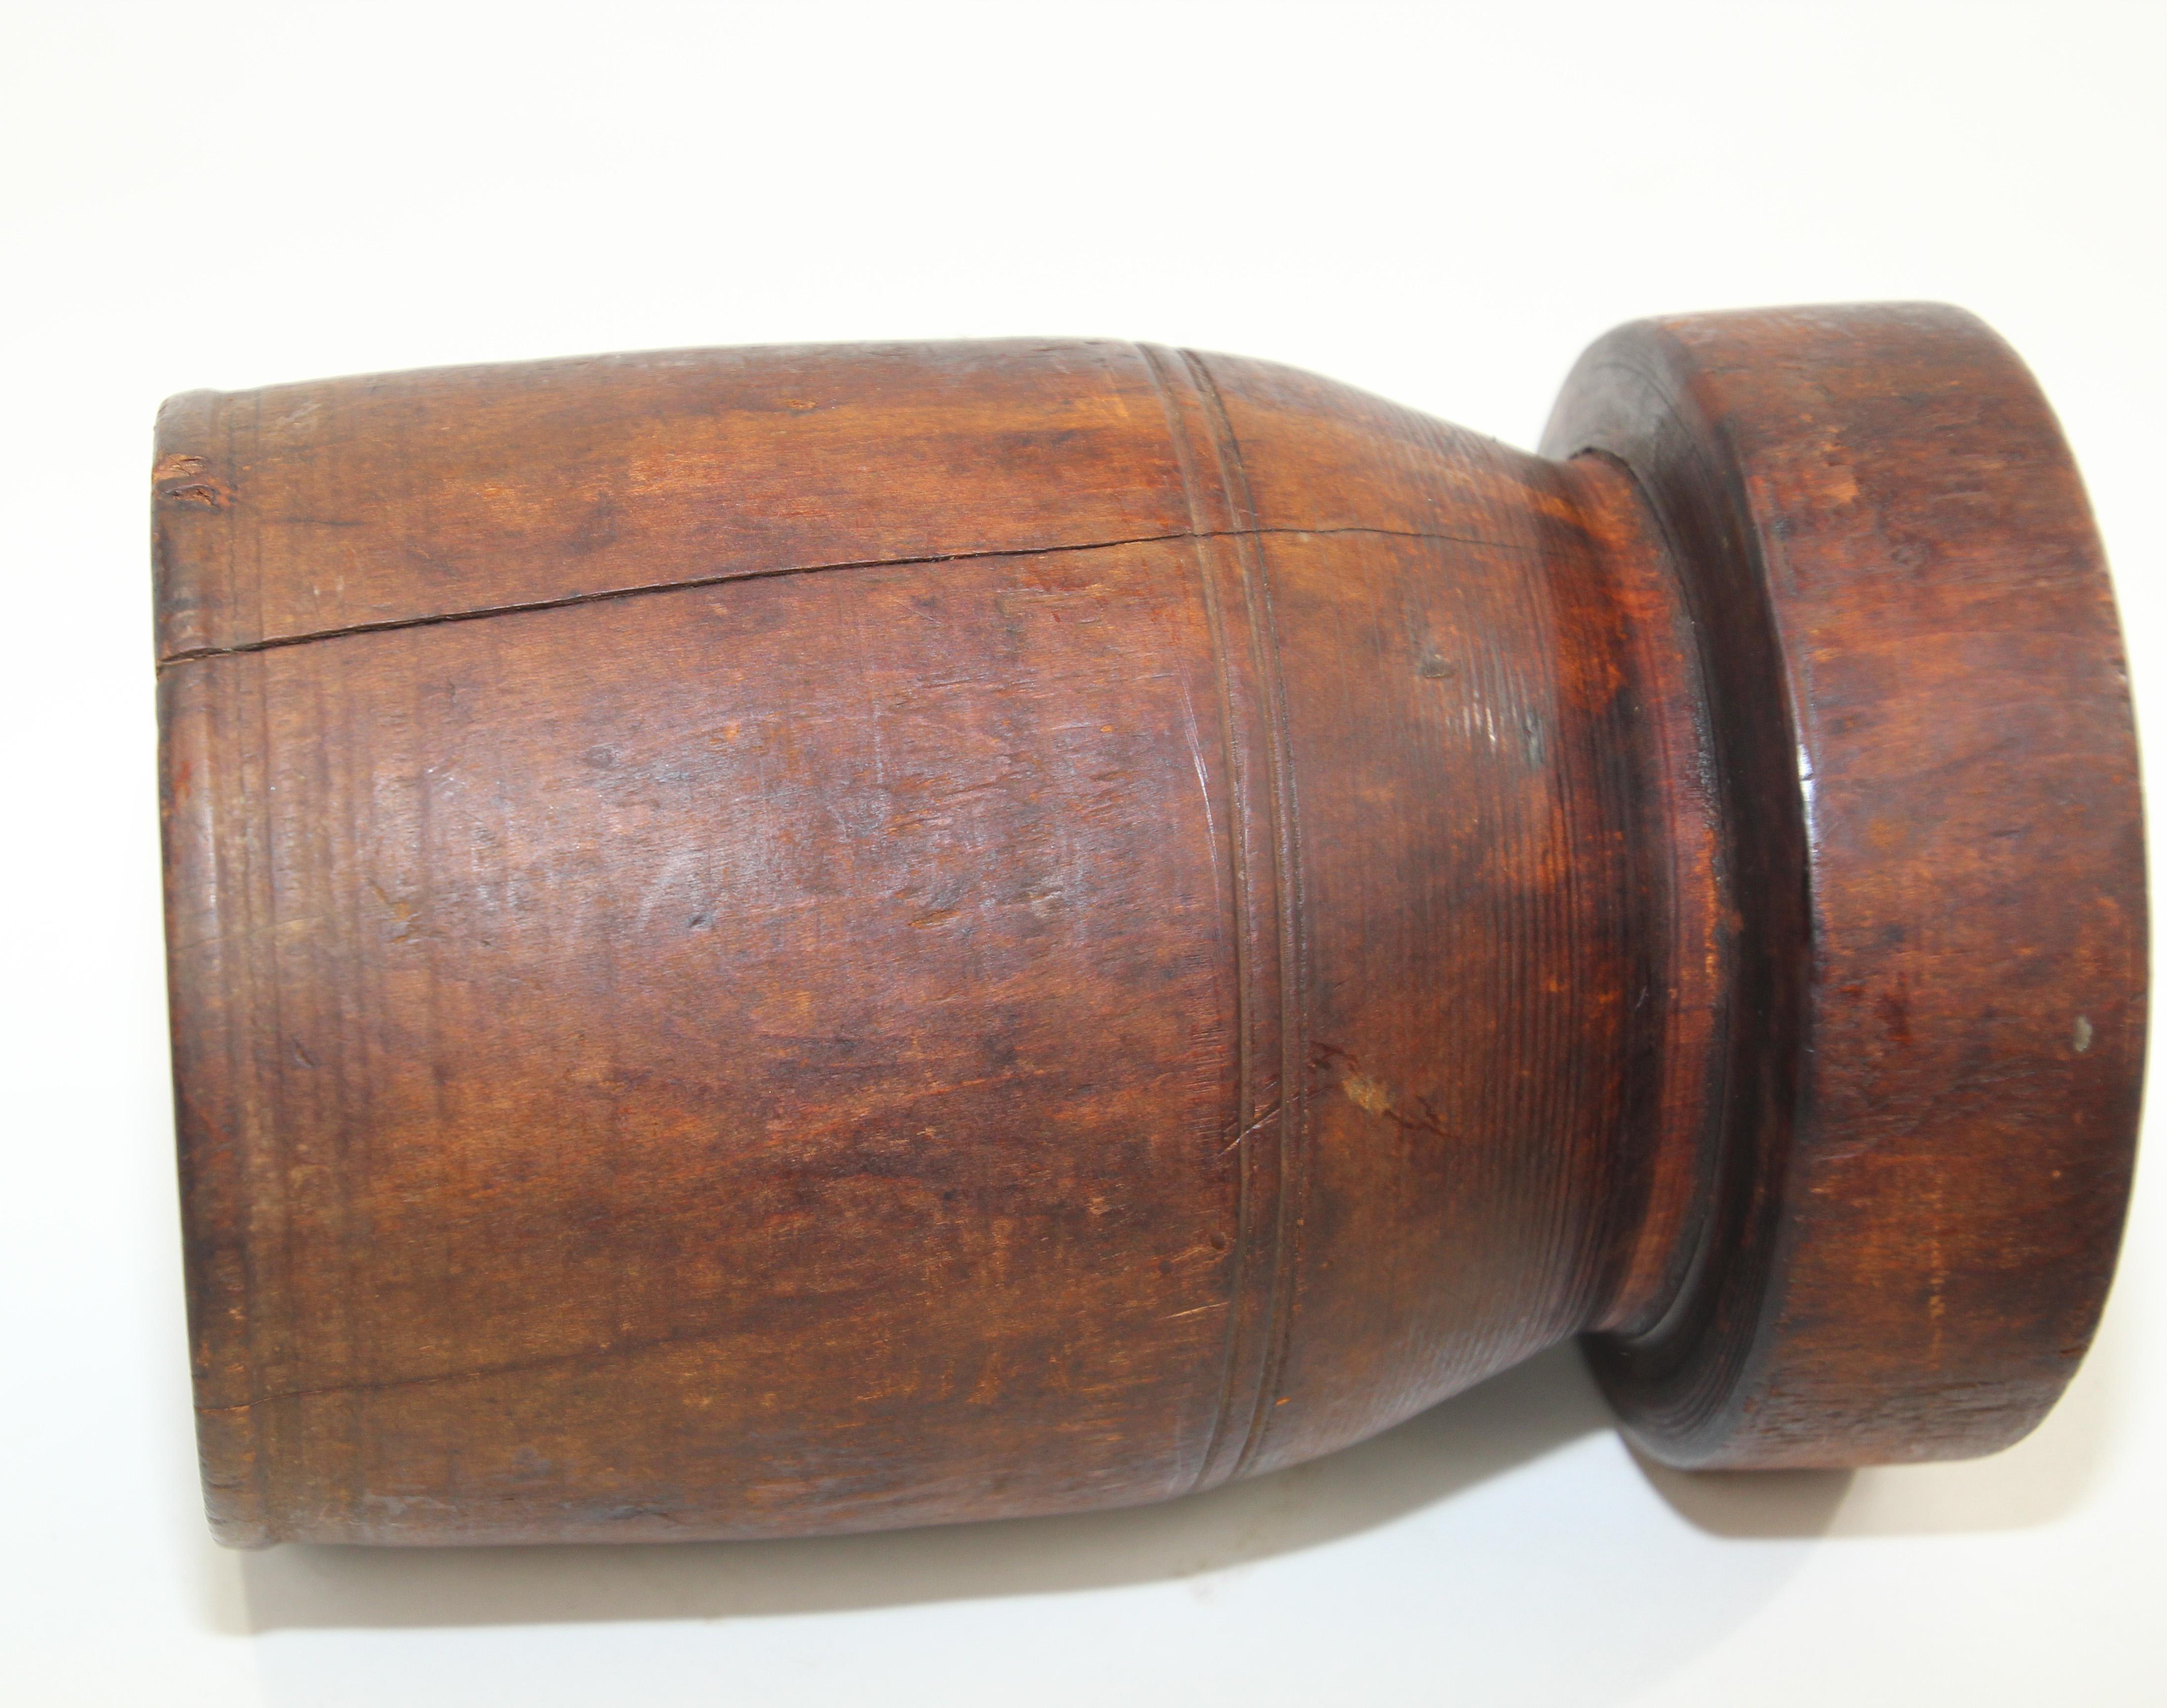 Large Antique Wooden American Mortar and Pestle For Sale 2